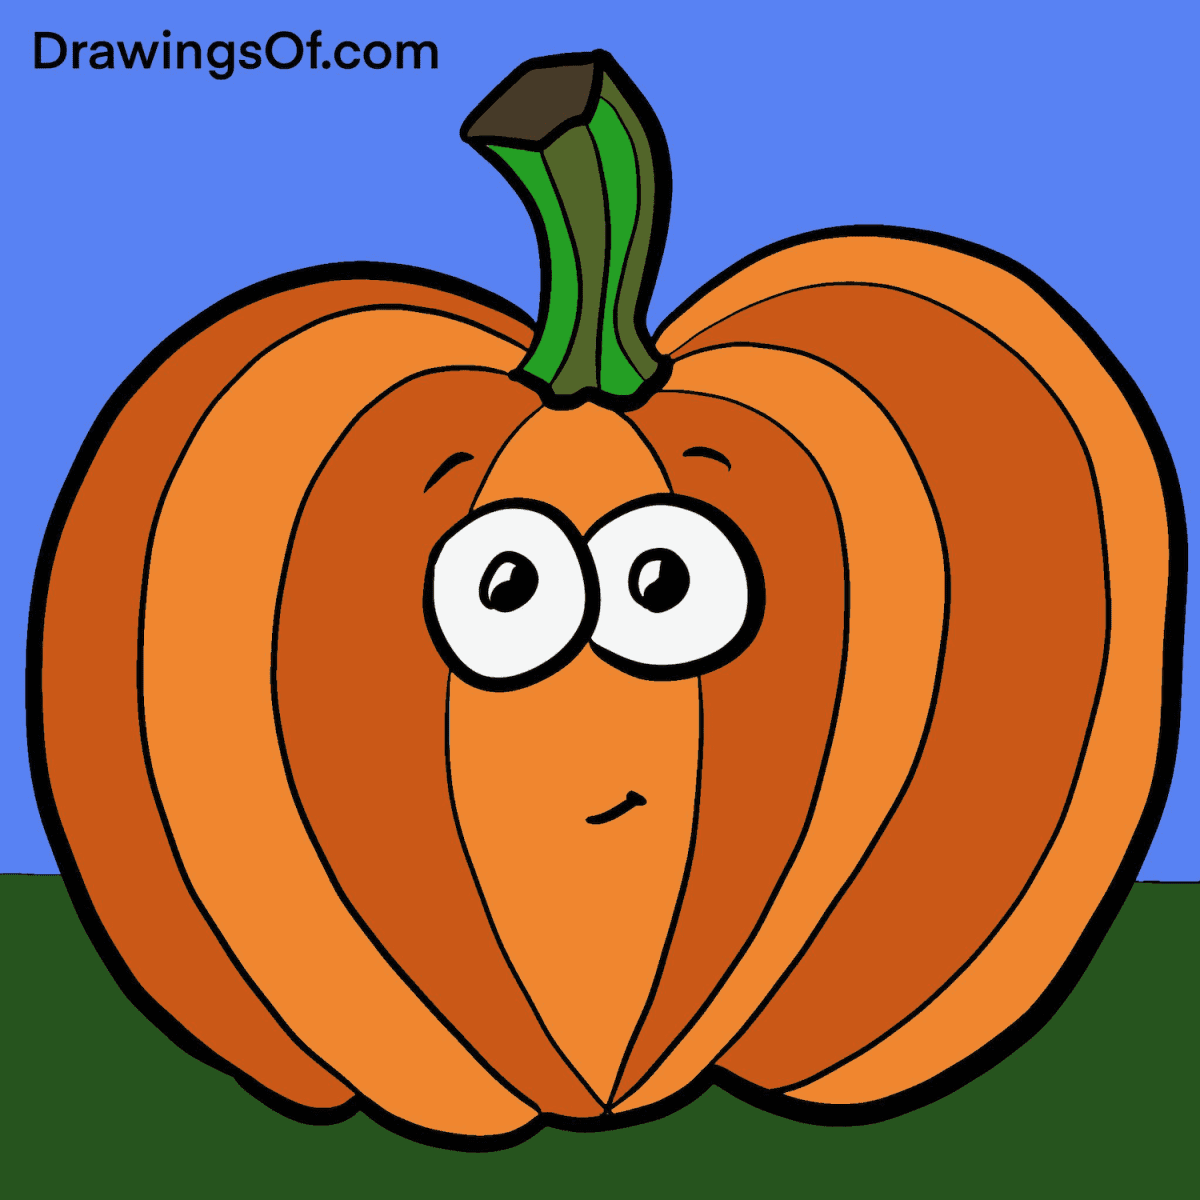 How To Draw A Pumpkin Easily Tutorial Background, Picture Of A Pumpkin  Drawing Background Image And Wallpaper for Free Download